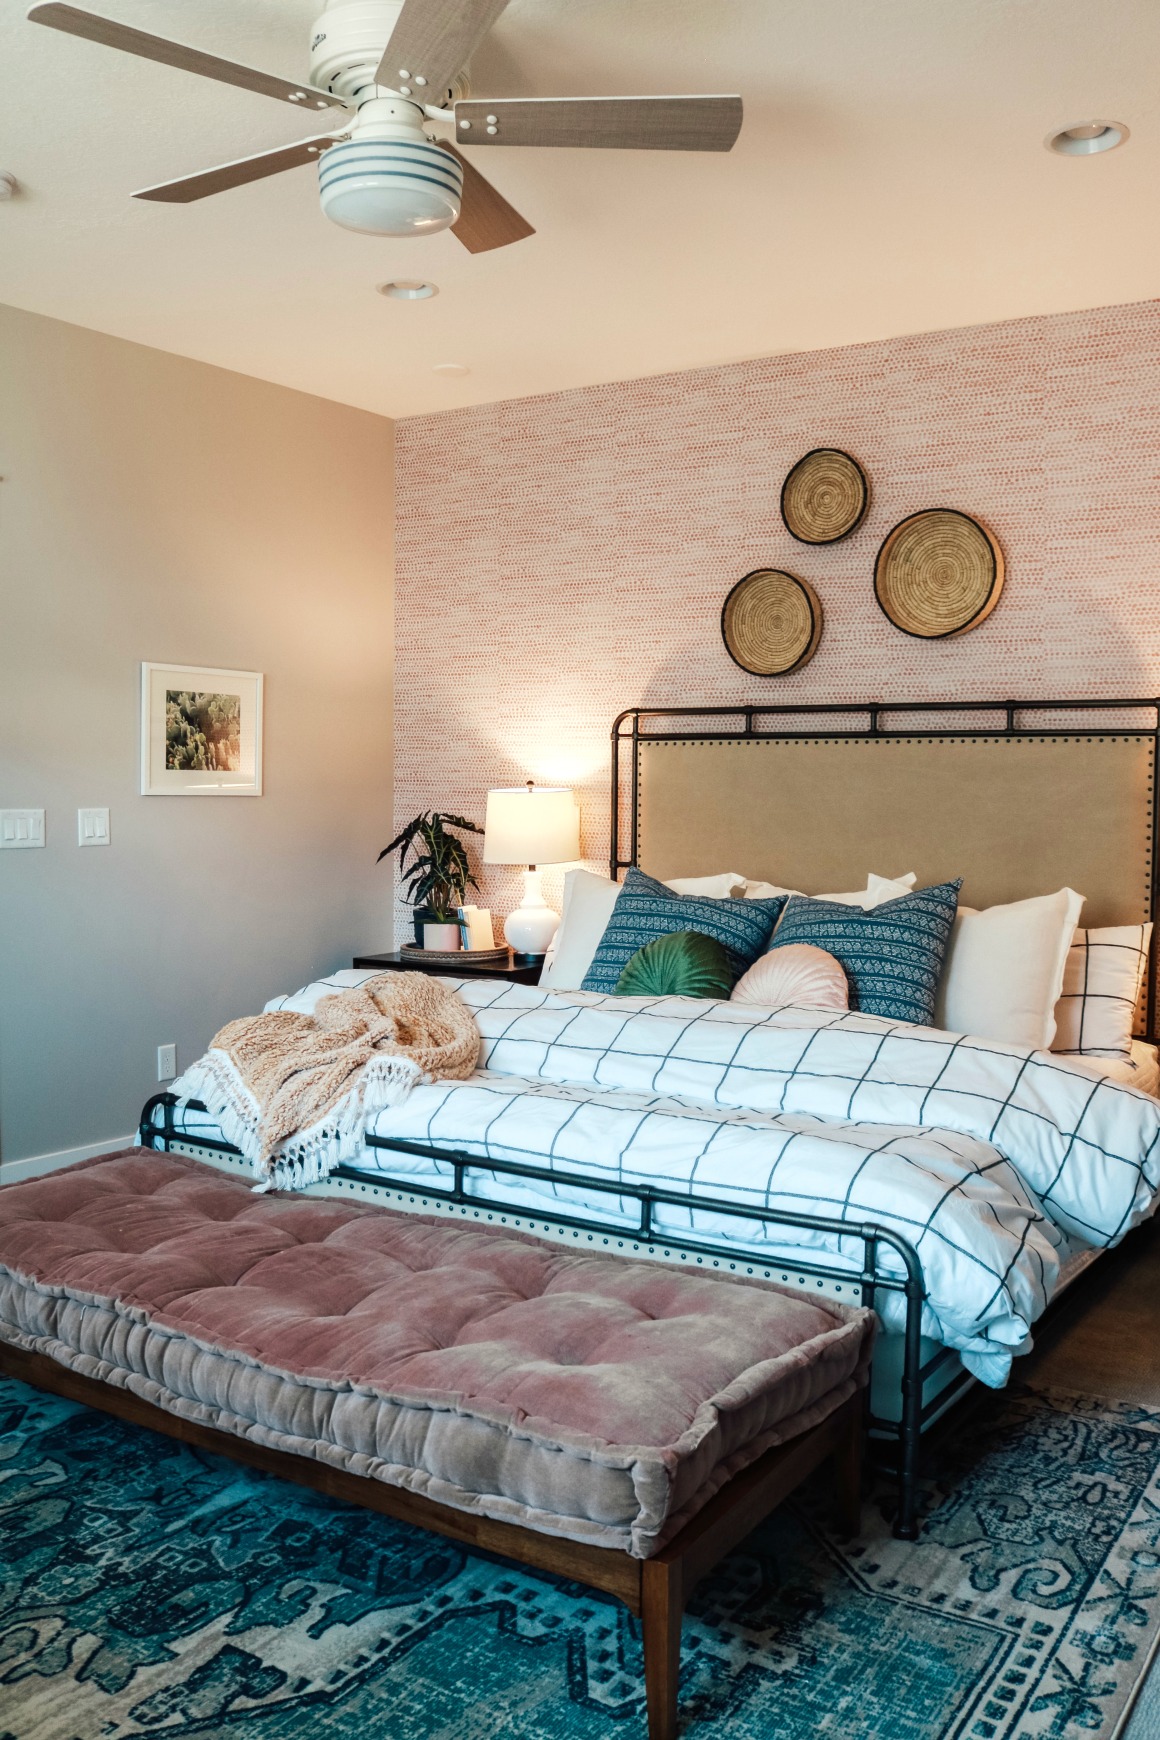 5 Simple Changes to Transform a Bedroom